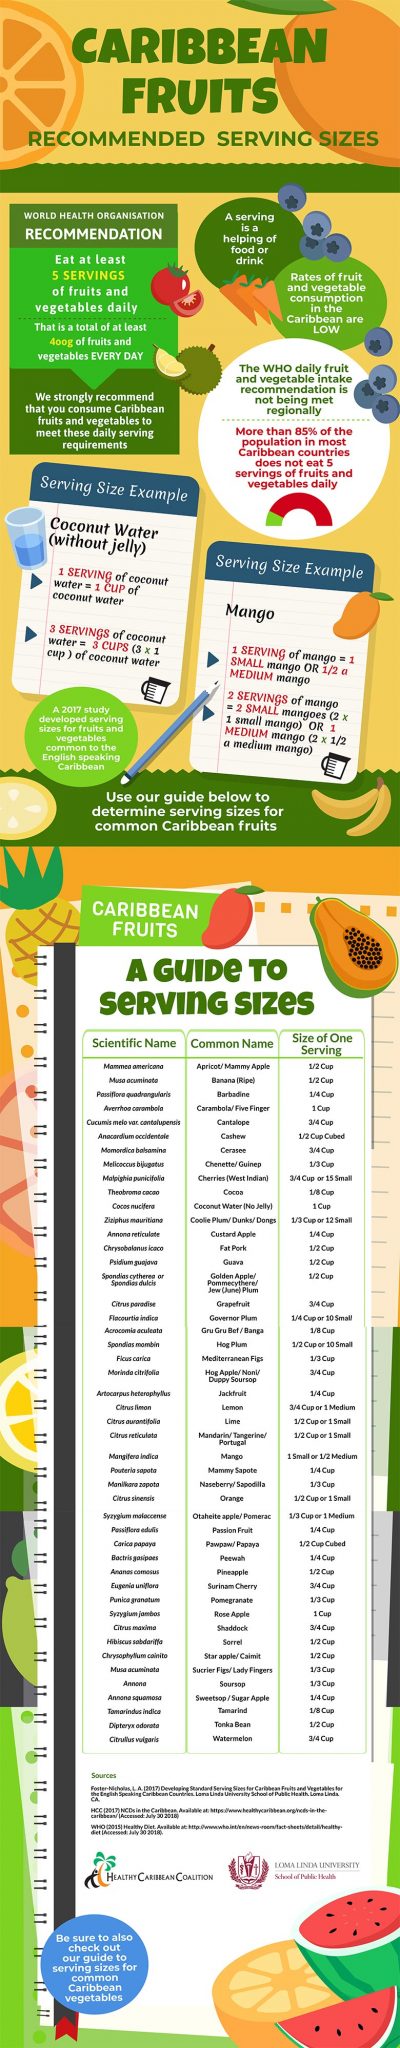 Caribbean fruits and vegetables